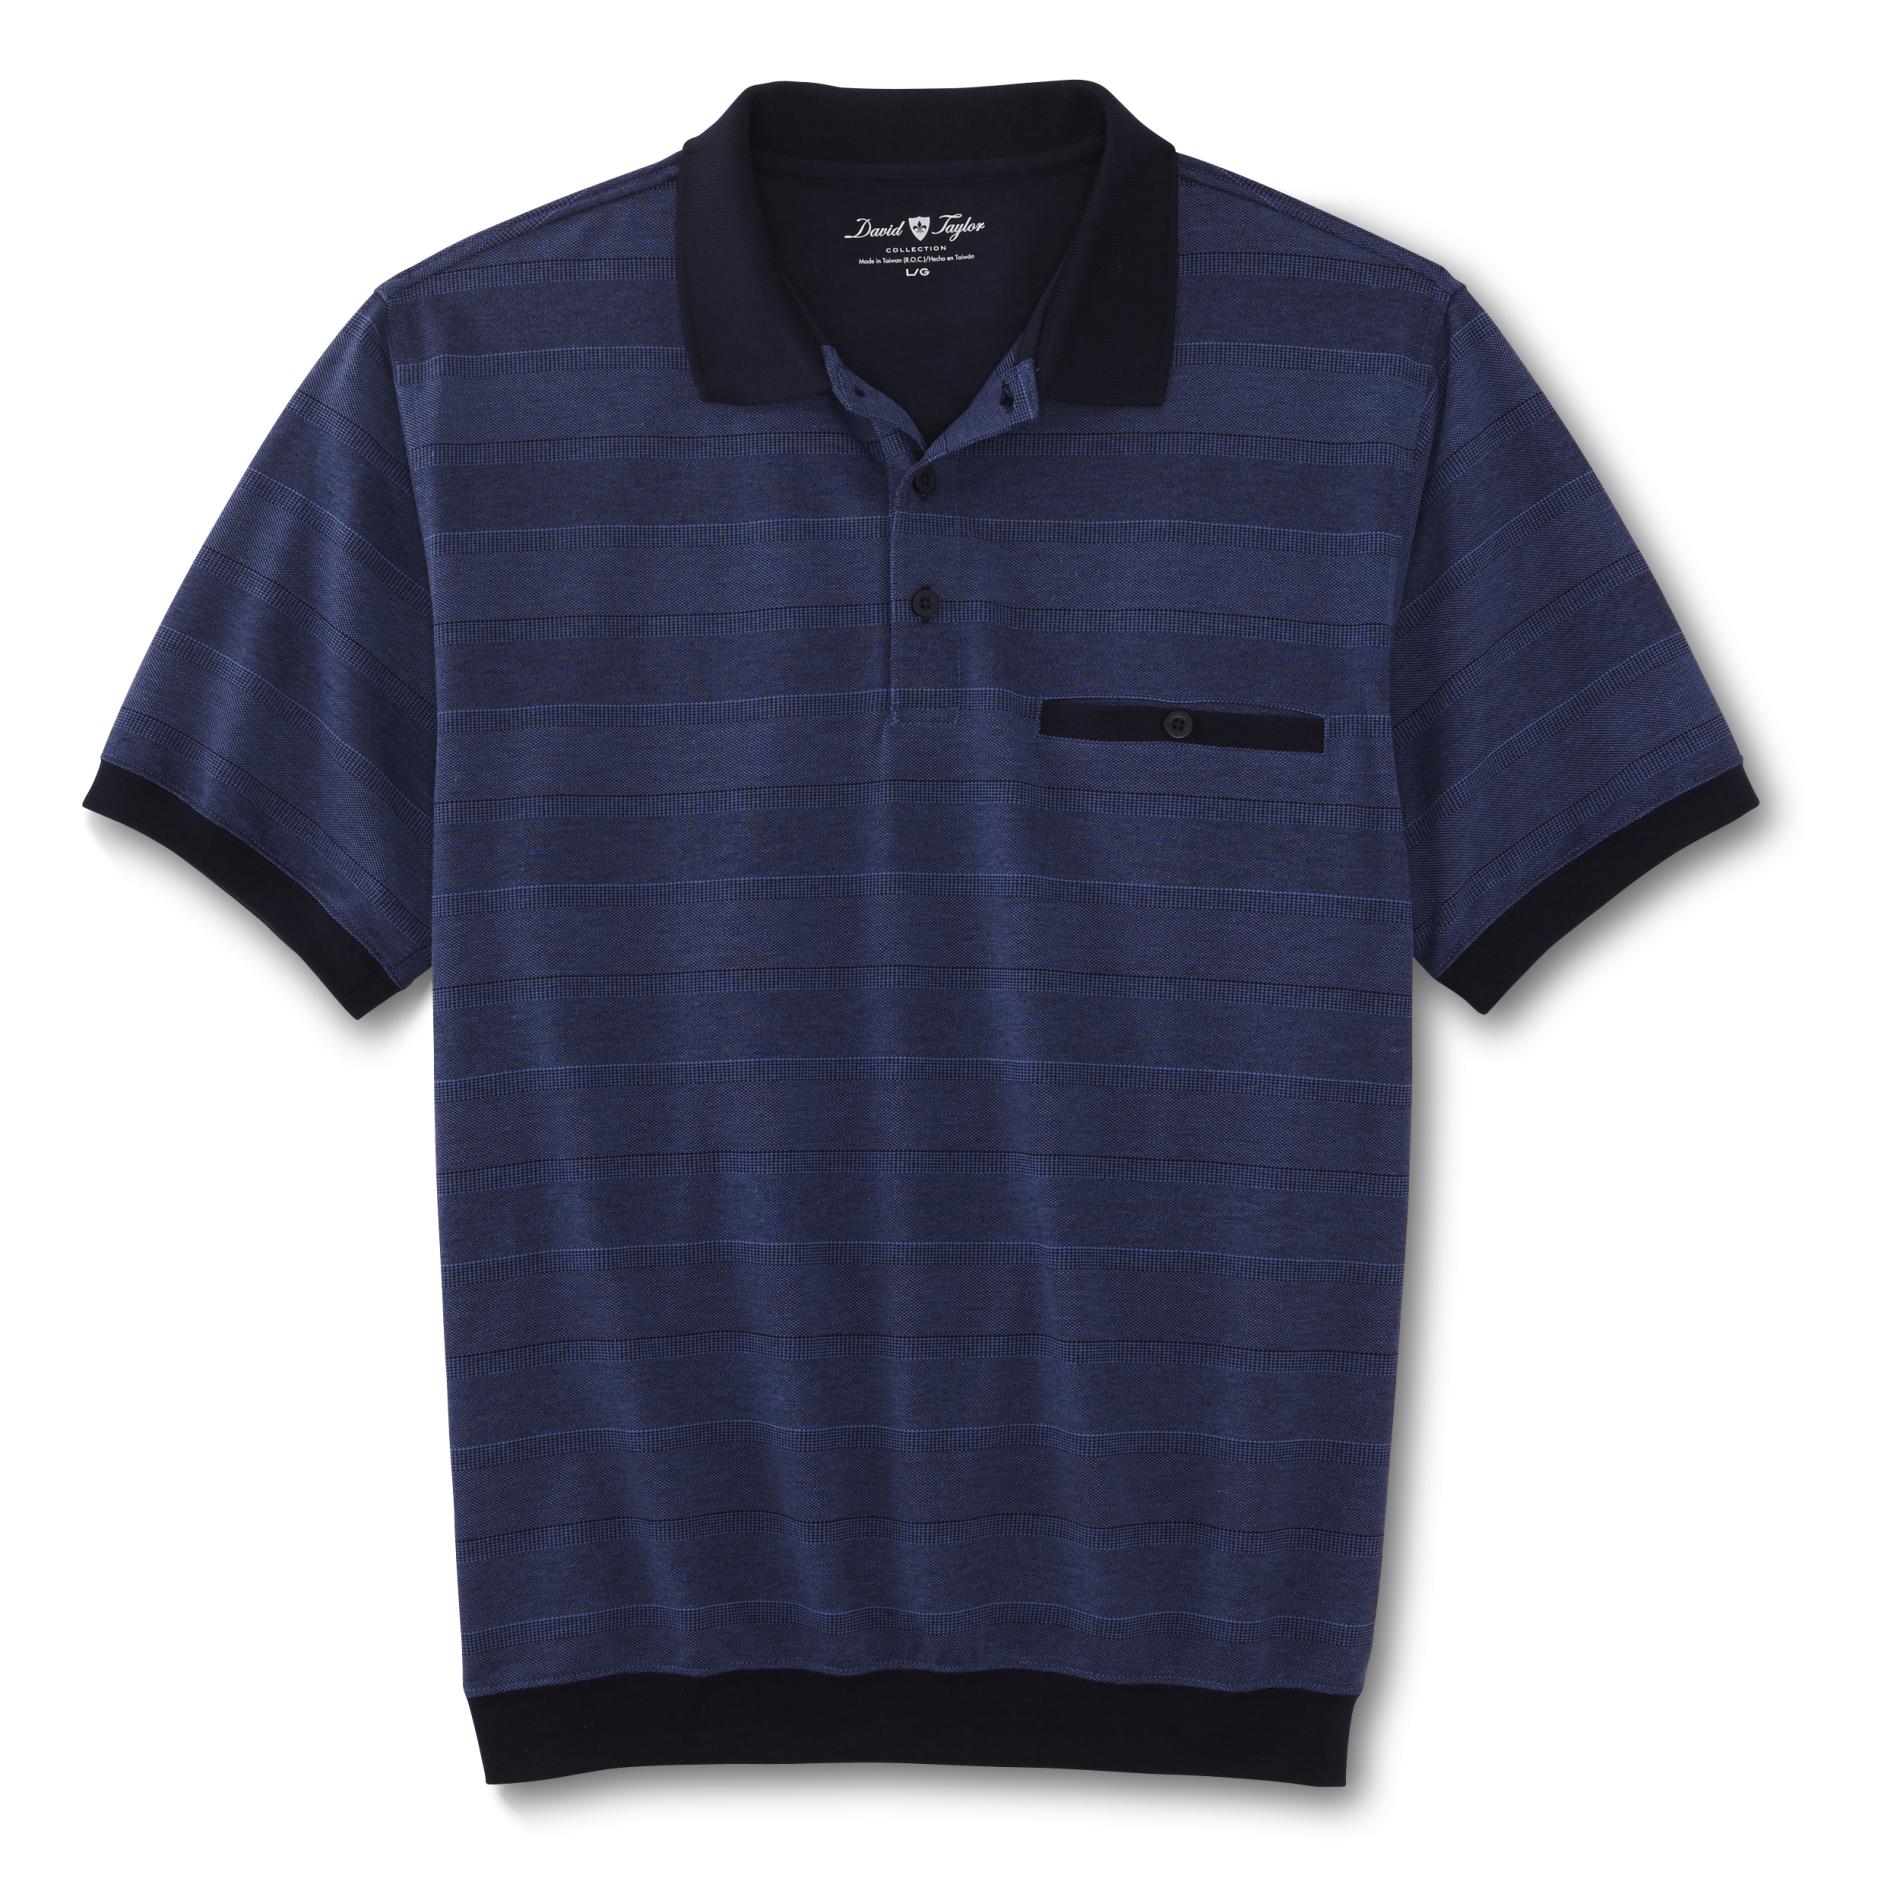 David Taylor Collection Men's Banded Bottom Polo Shirt - Striped